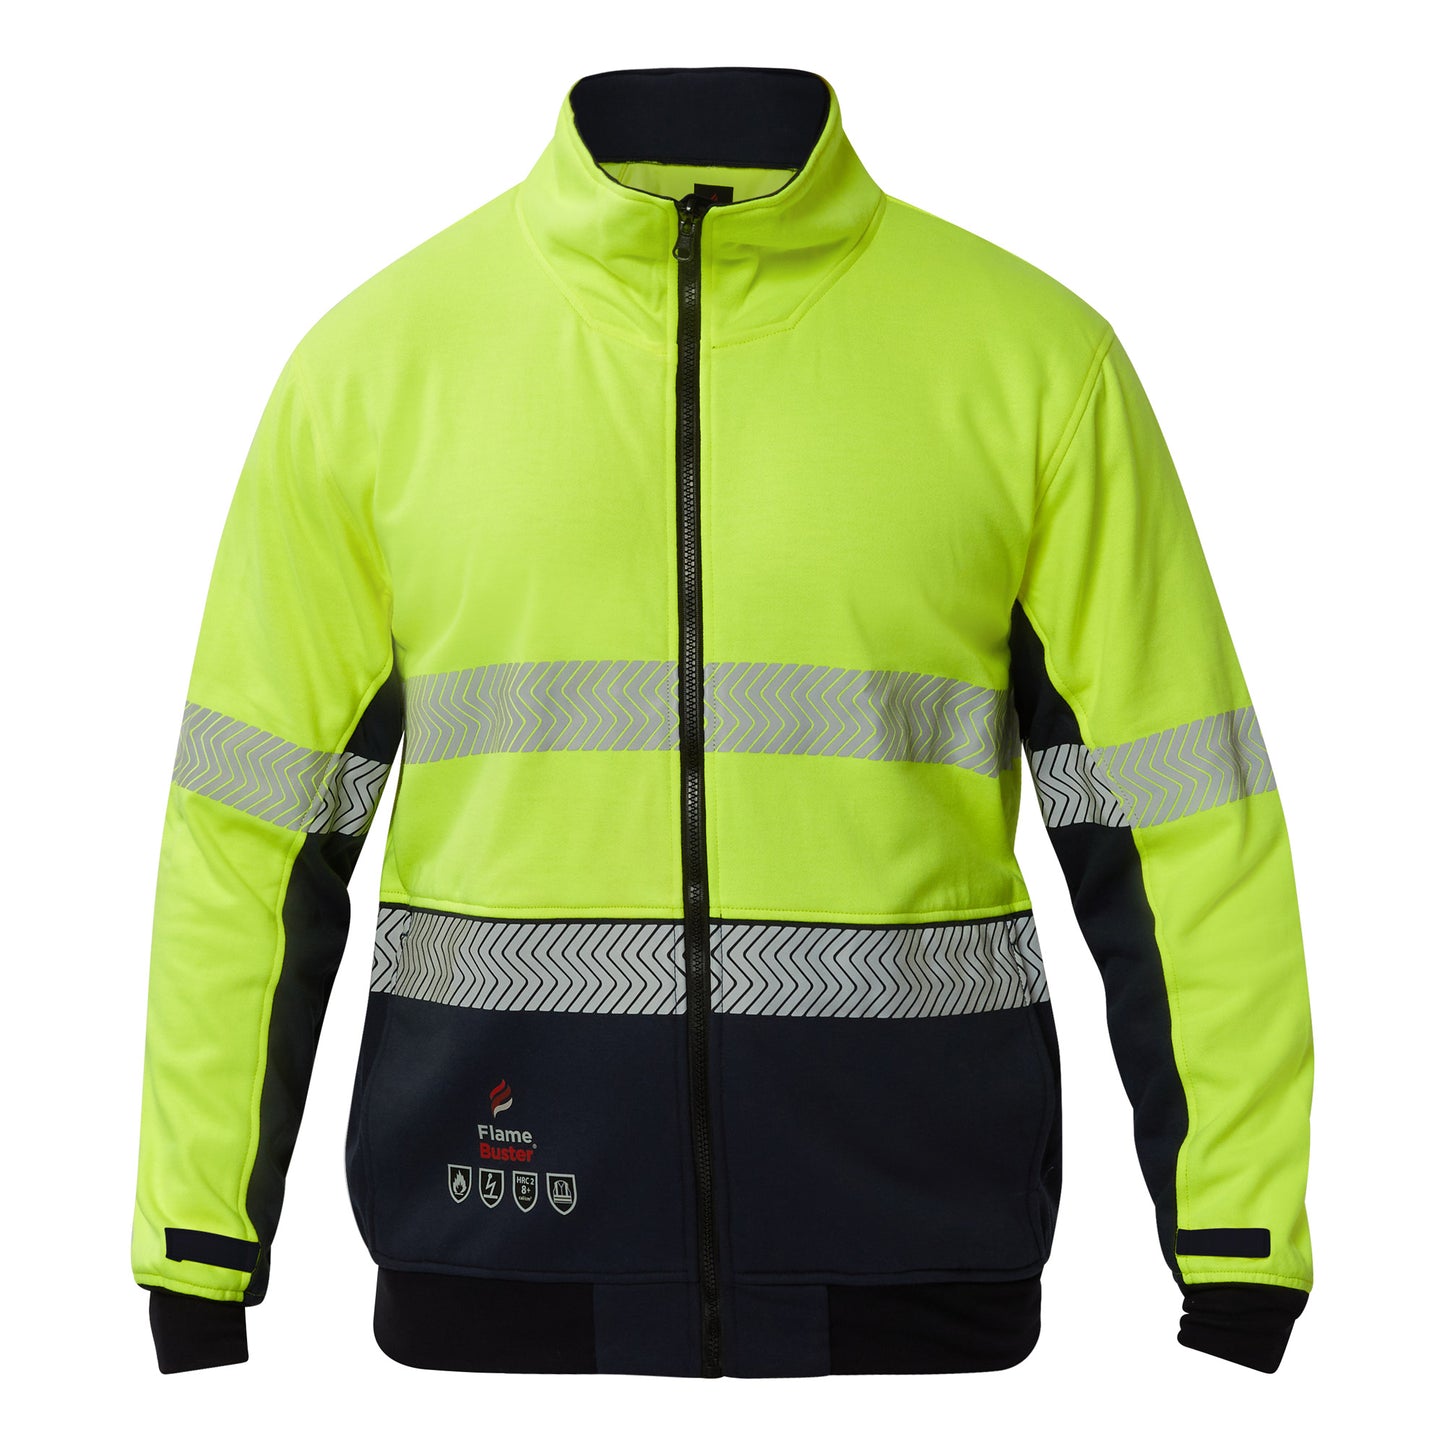 TORRENT HRC2 Reflective Wet Weather 3 in 1 Jacket - made by FlameBuster